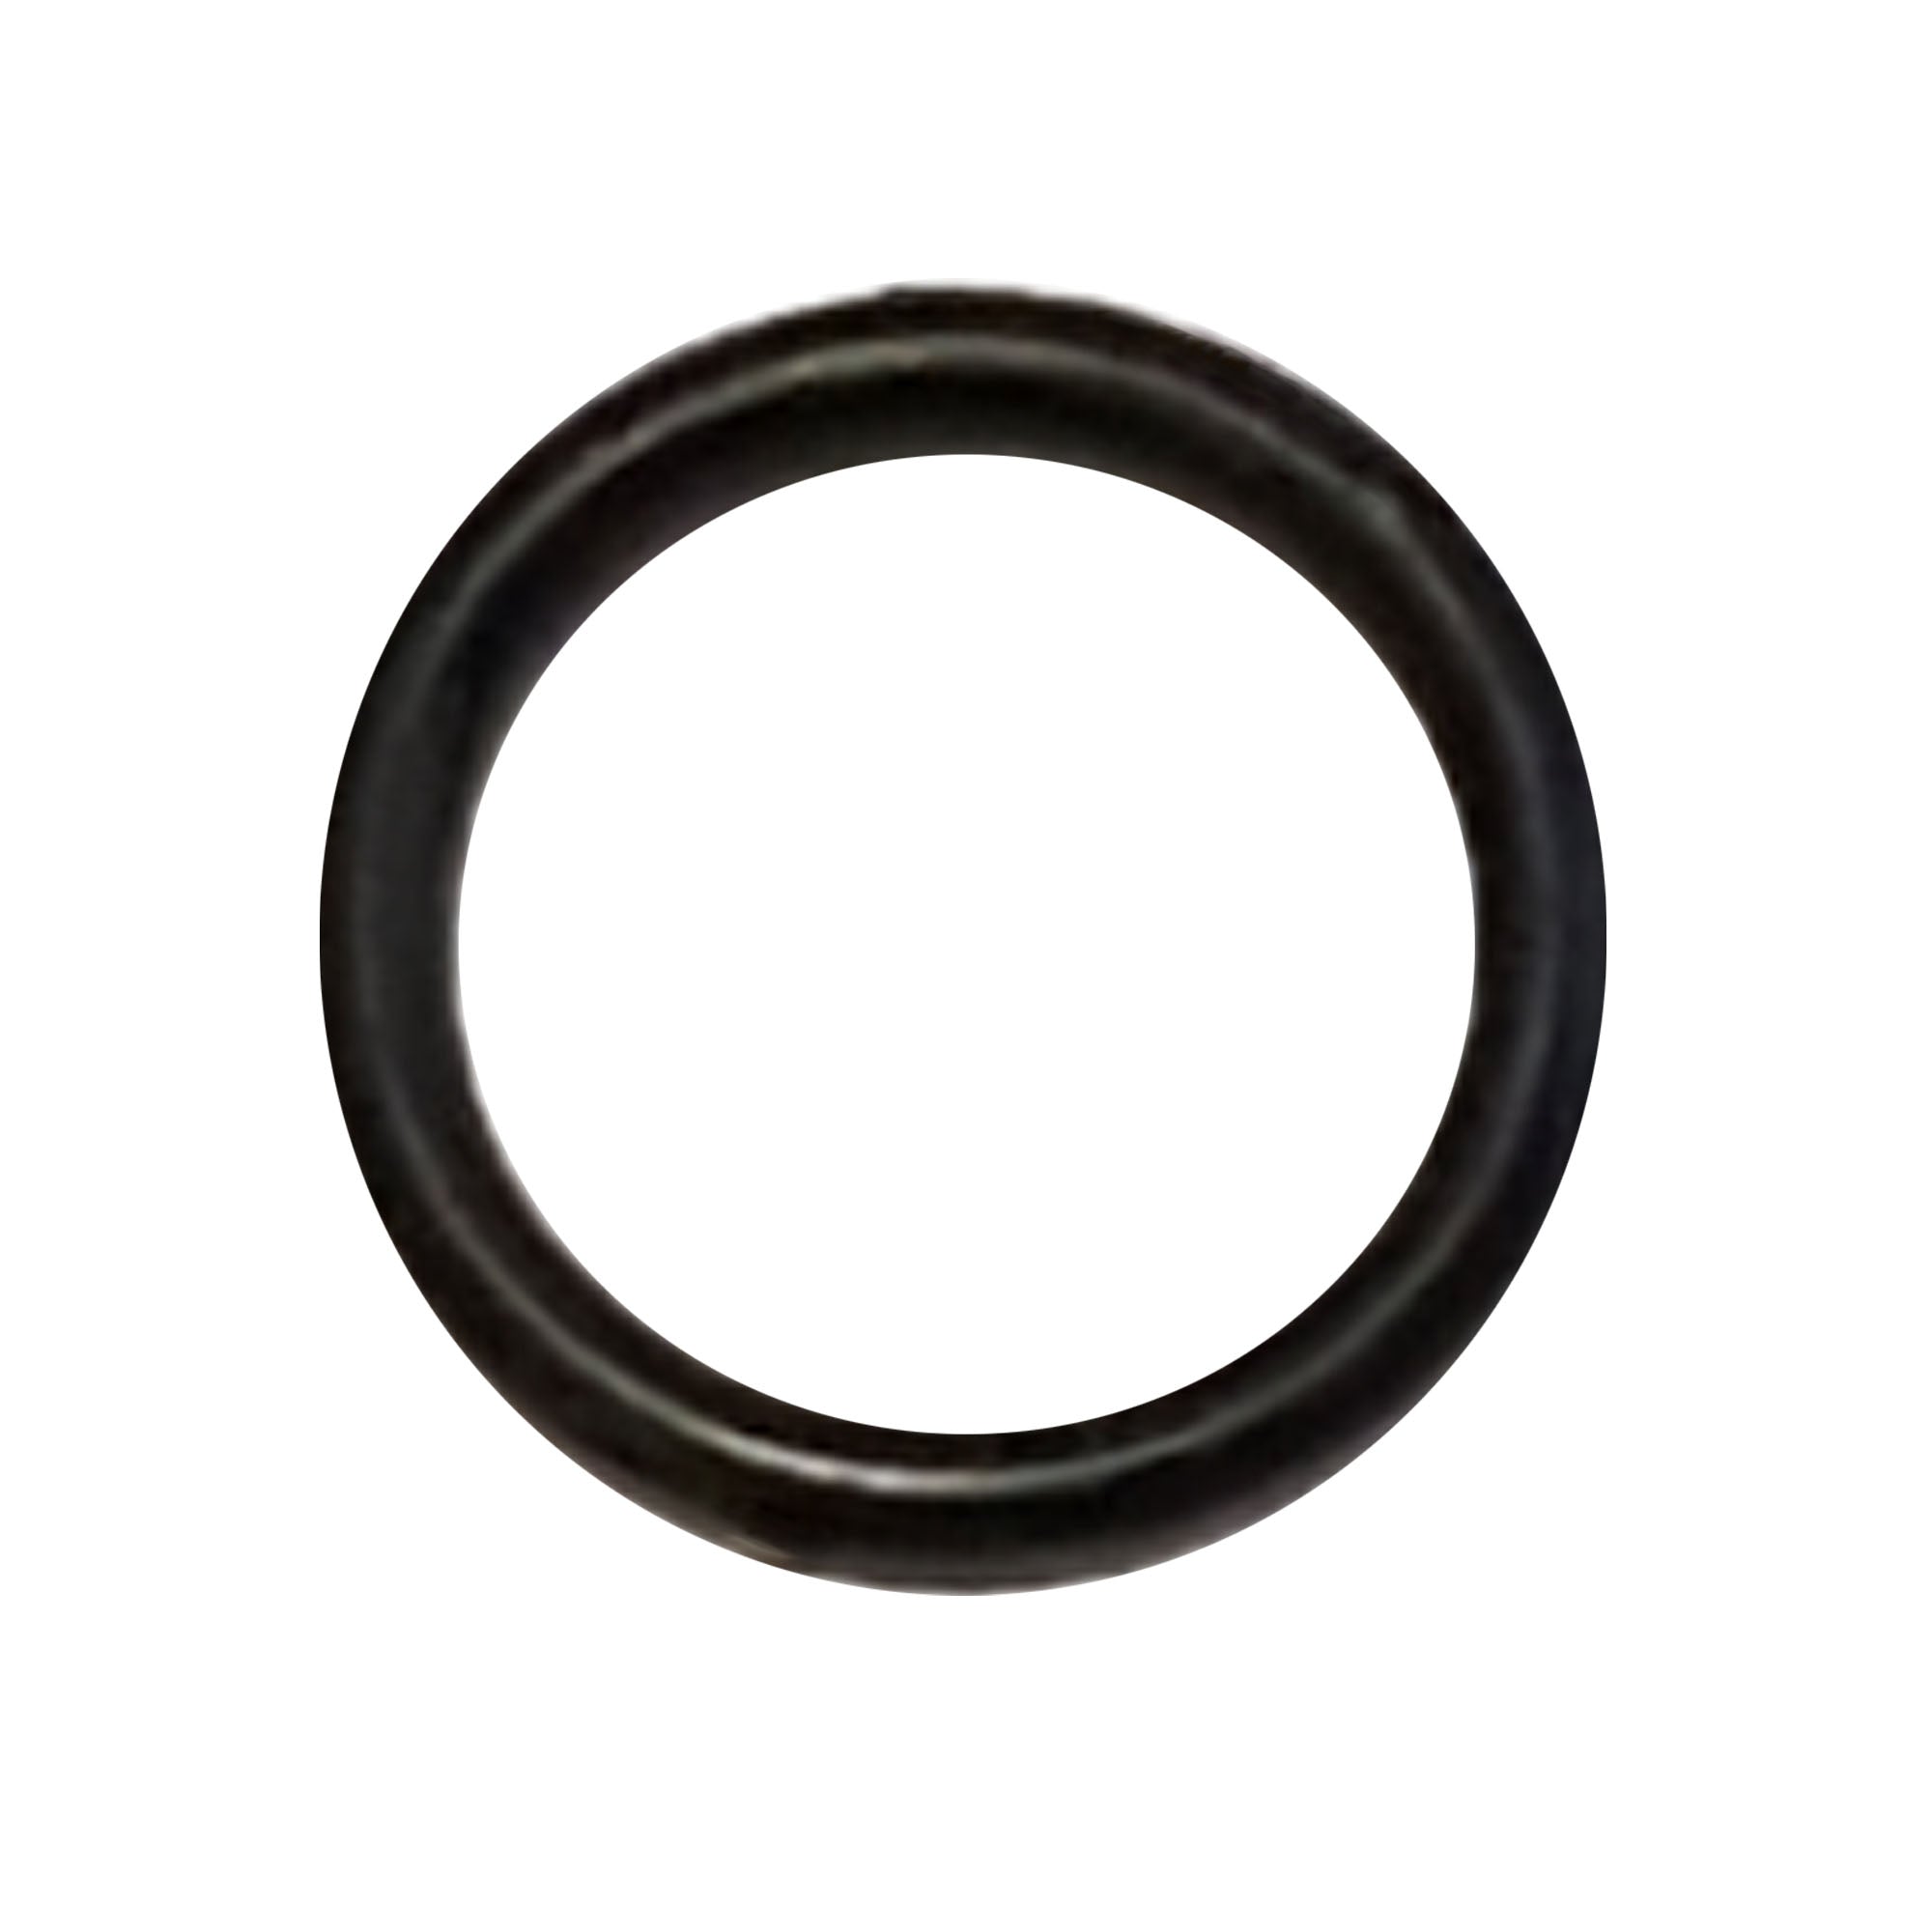 256772 - O-Ring, Pack of 6 - PURspray